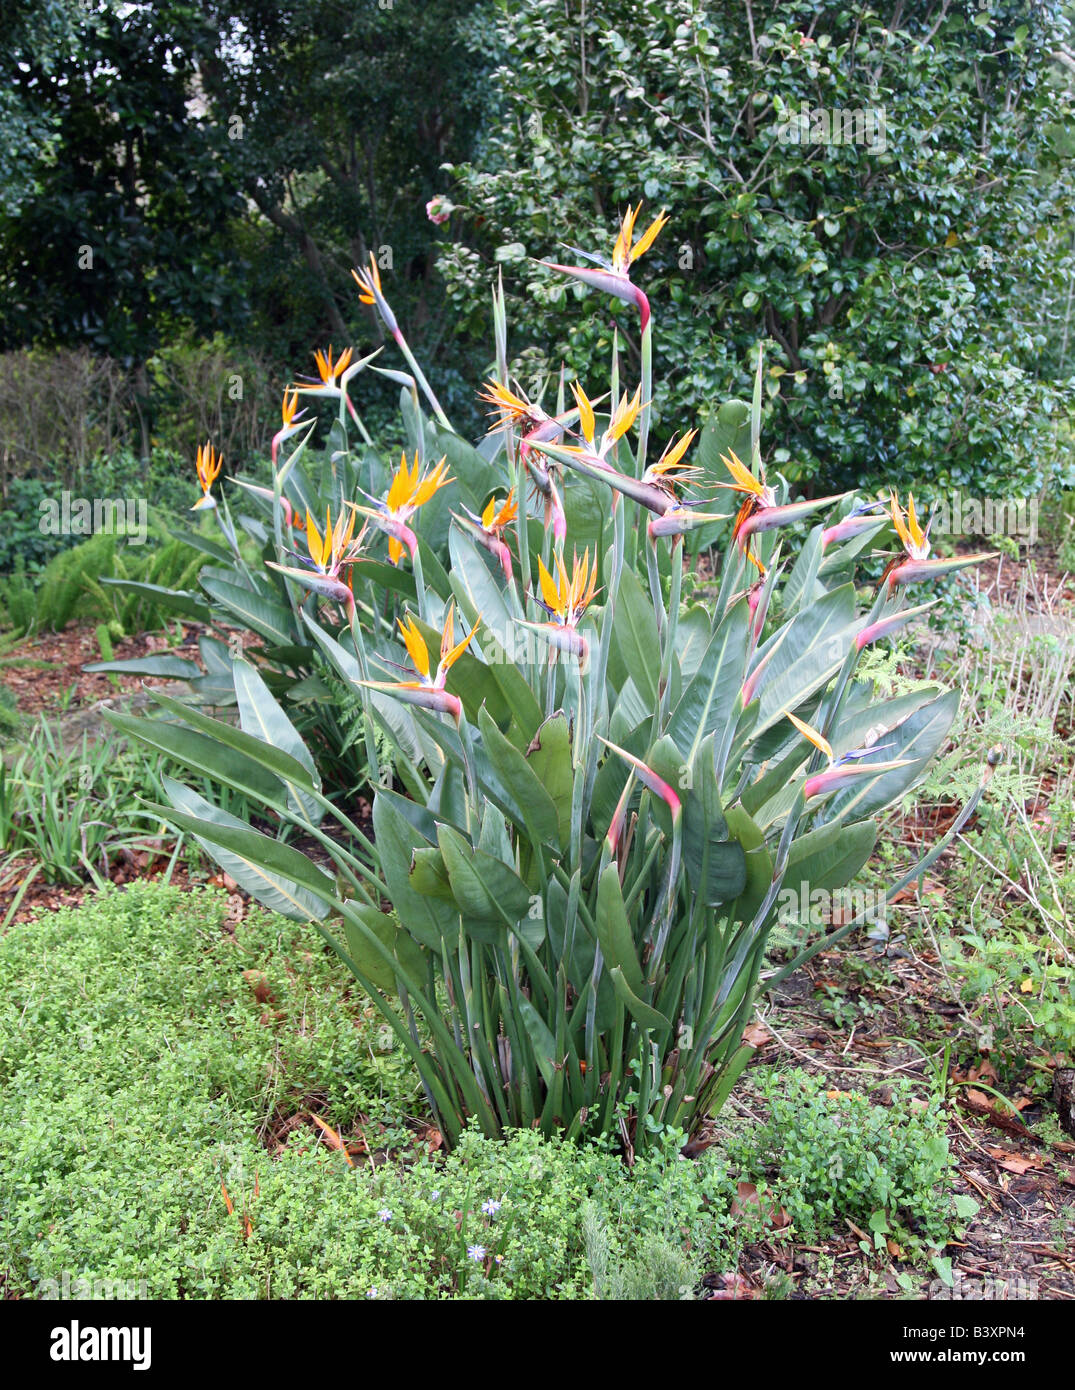 A clump of Bird of paradise plants Strelitzia or Crane flower as it is known in its native South Africa Stock Photo